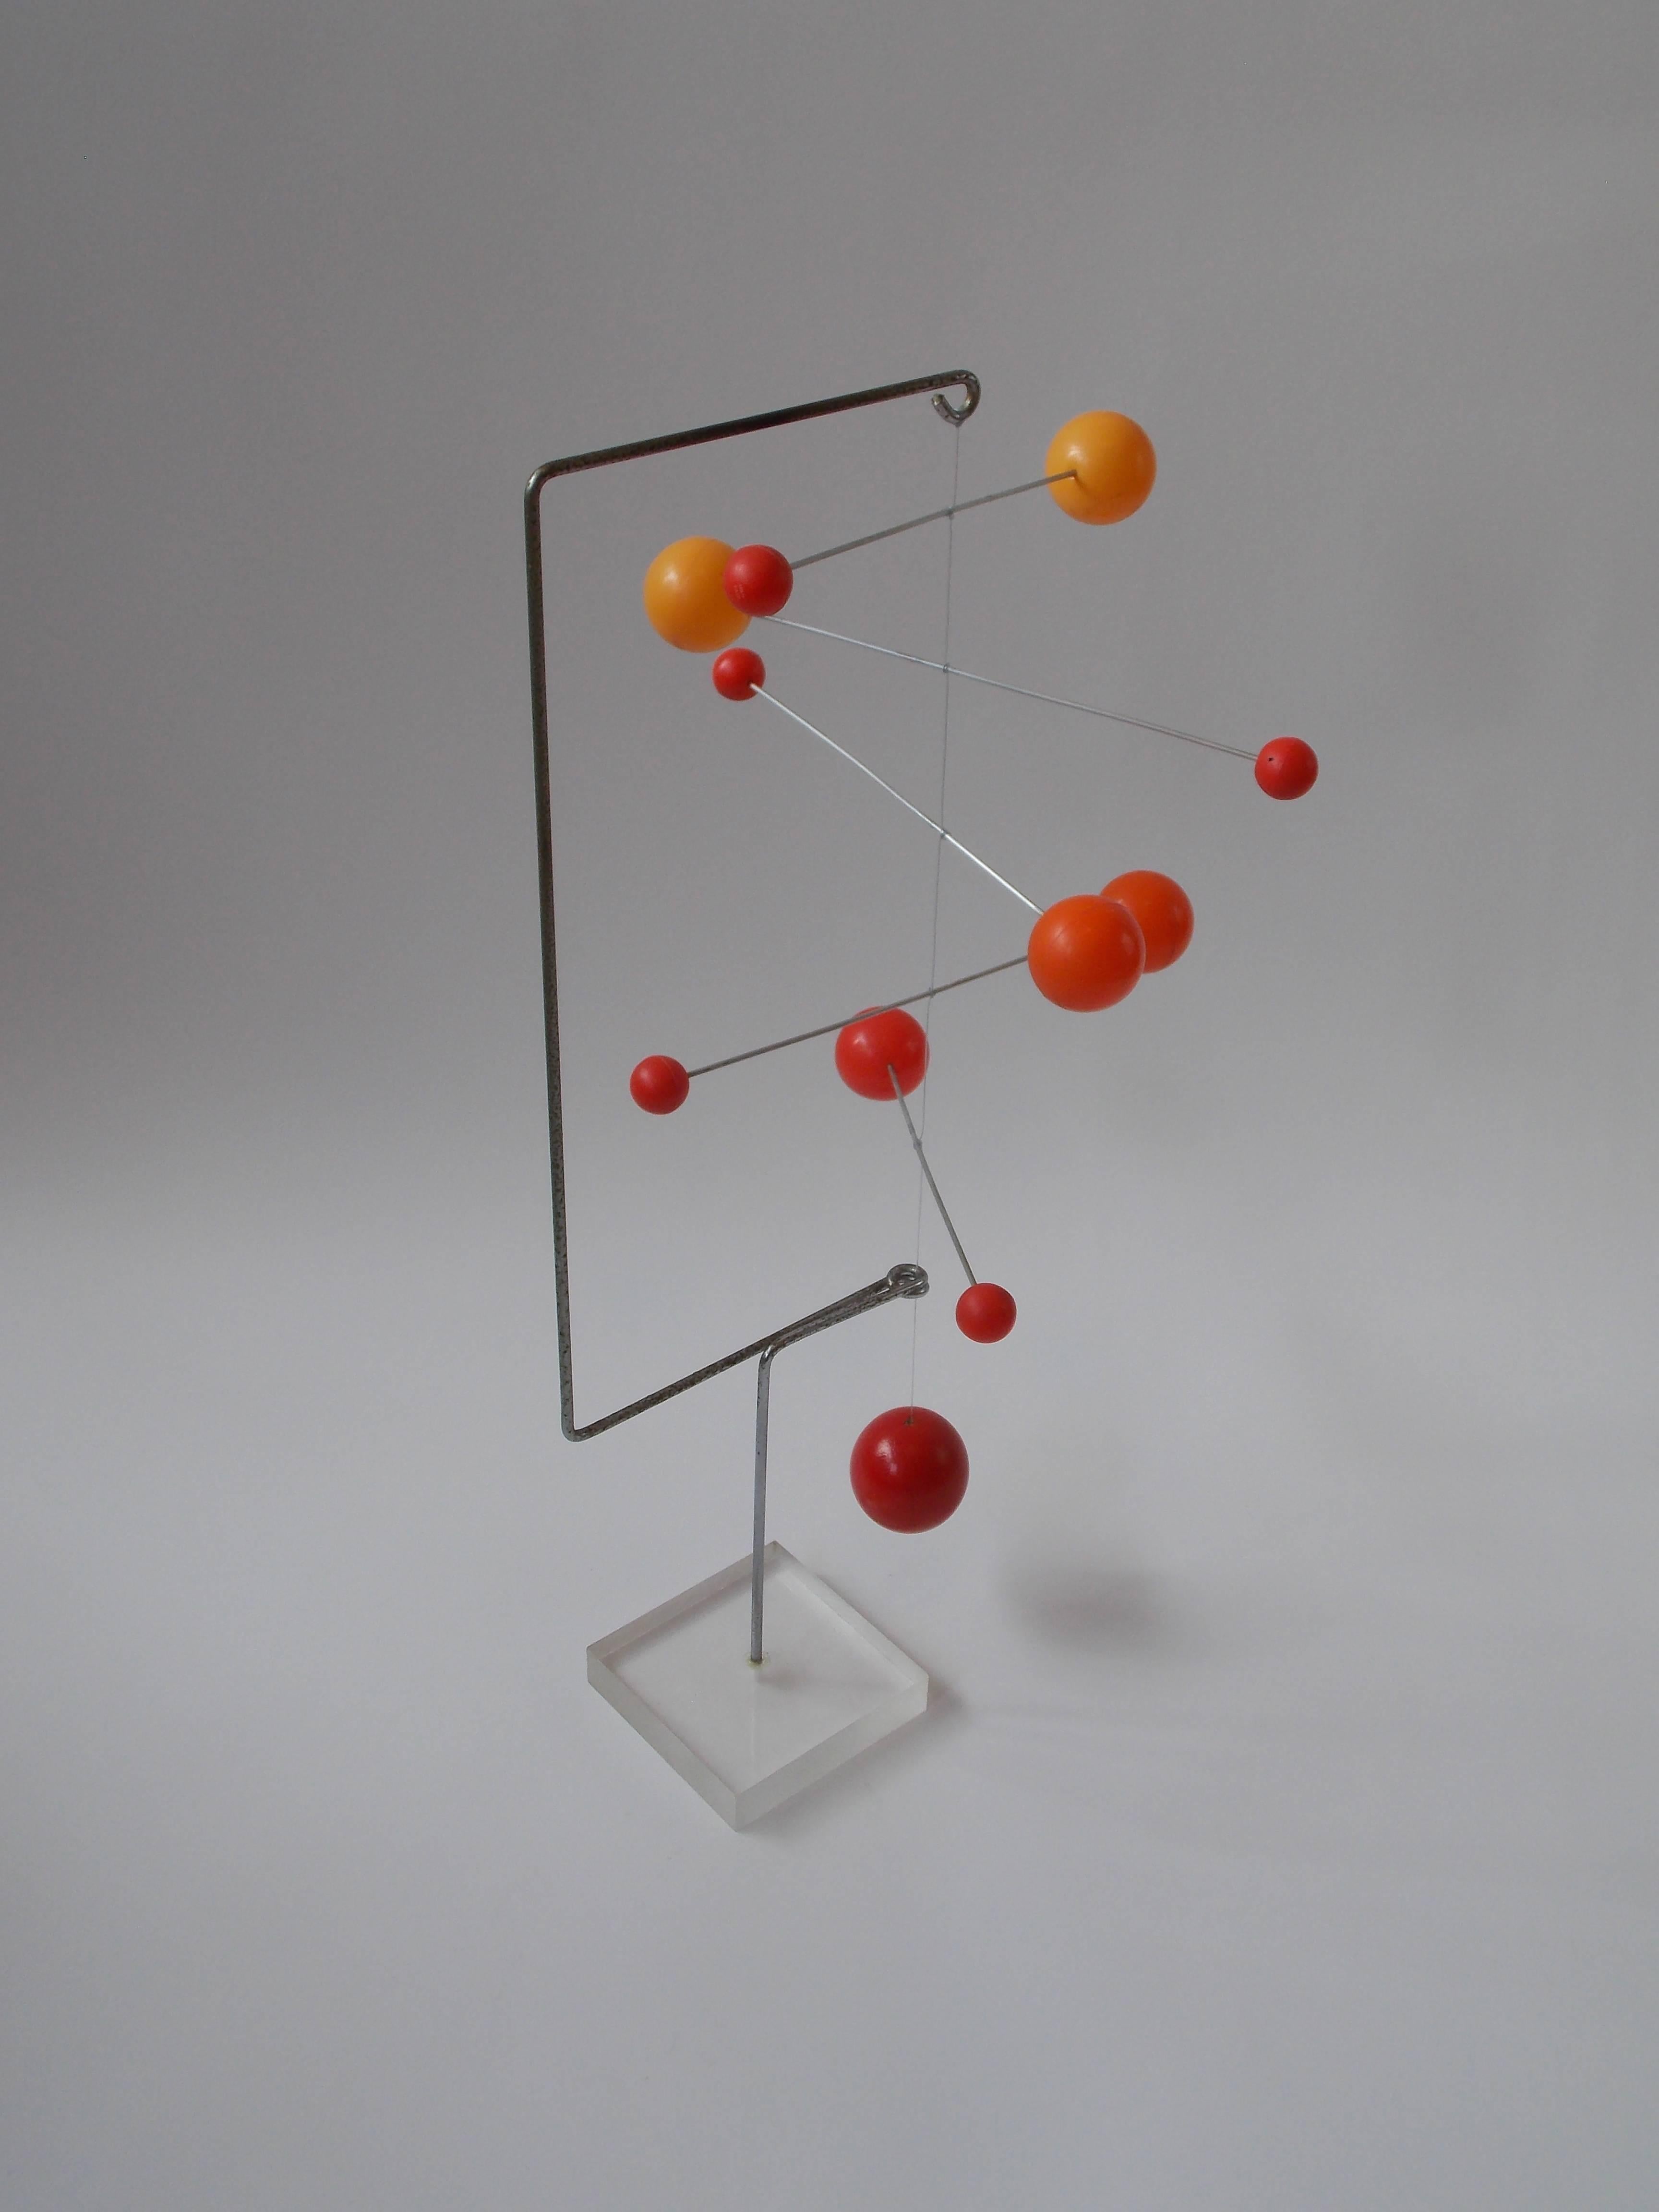 A fun design. Made of colored plastic spheres on aluminum rods and red painted solid wood sphere at the bottom with wire on a steel arm connected to a Lucite base. It's in the original vintage condition showing ware / patina, no damage. The spheres